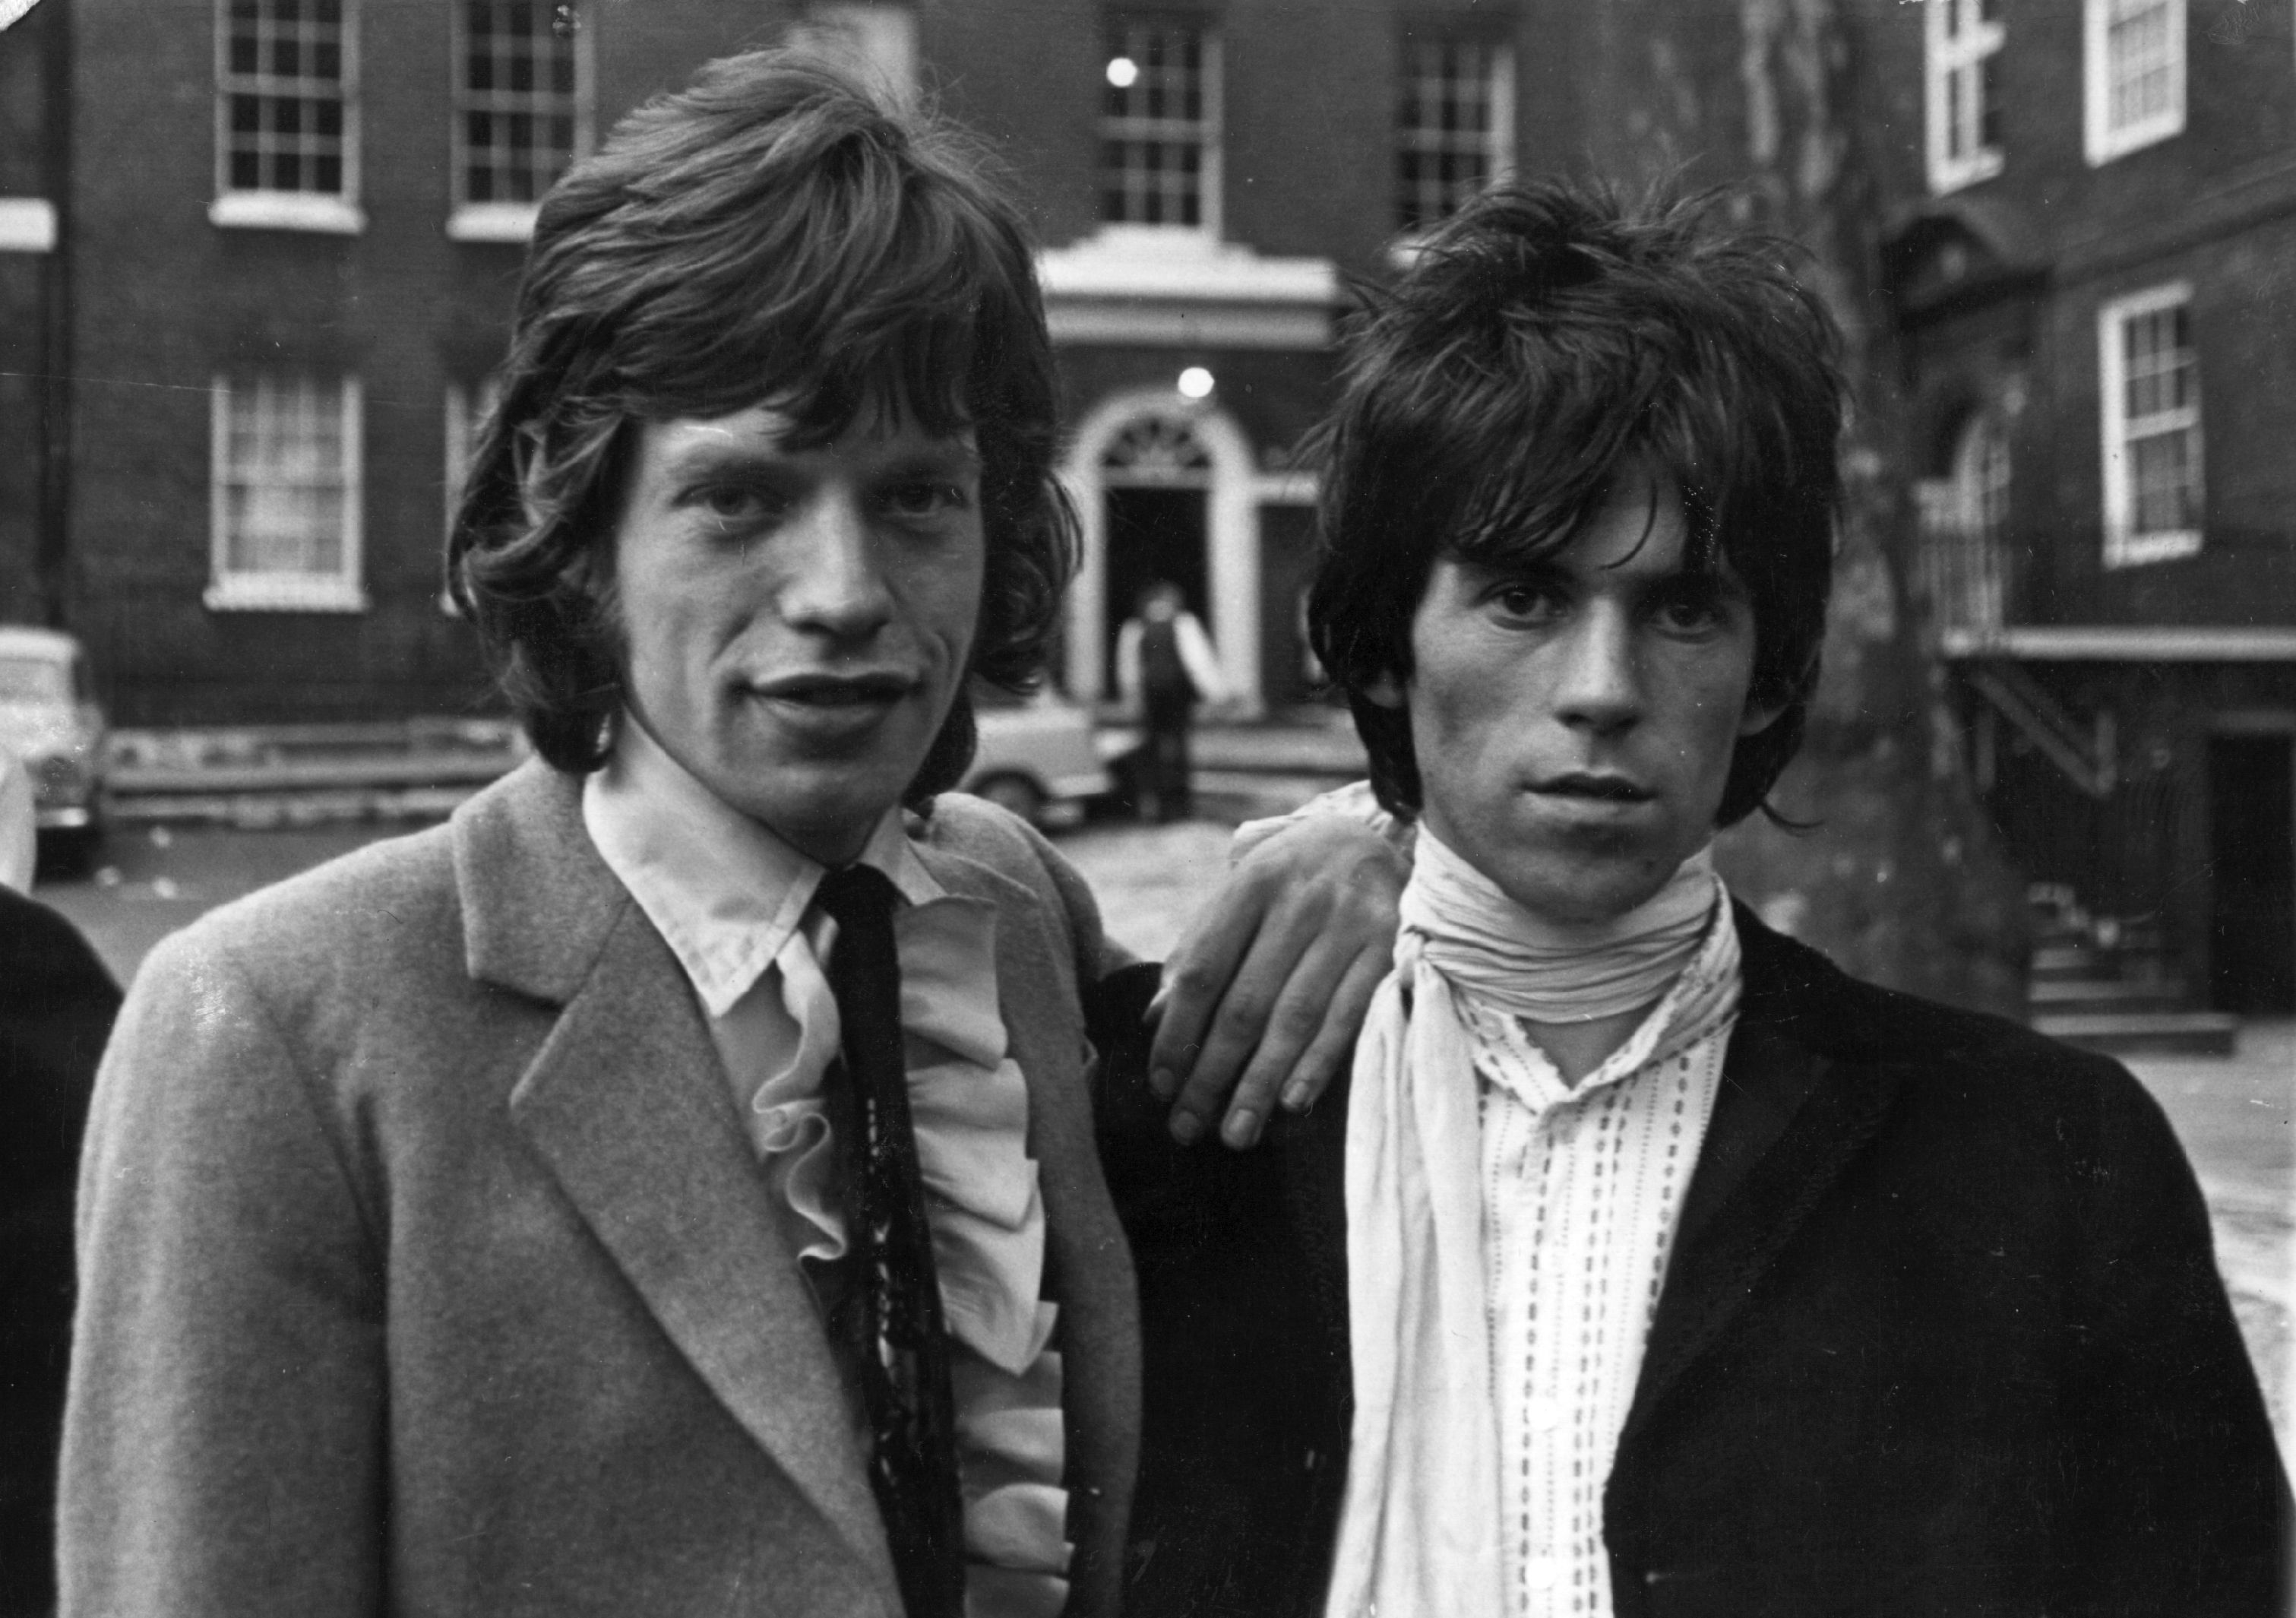 The Rolling Stones' Mick Jagger with his arm on Keith Richards